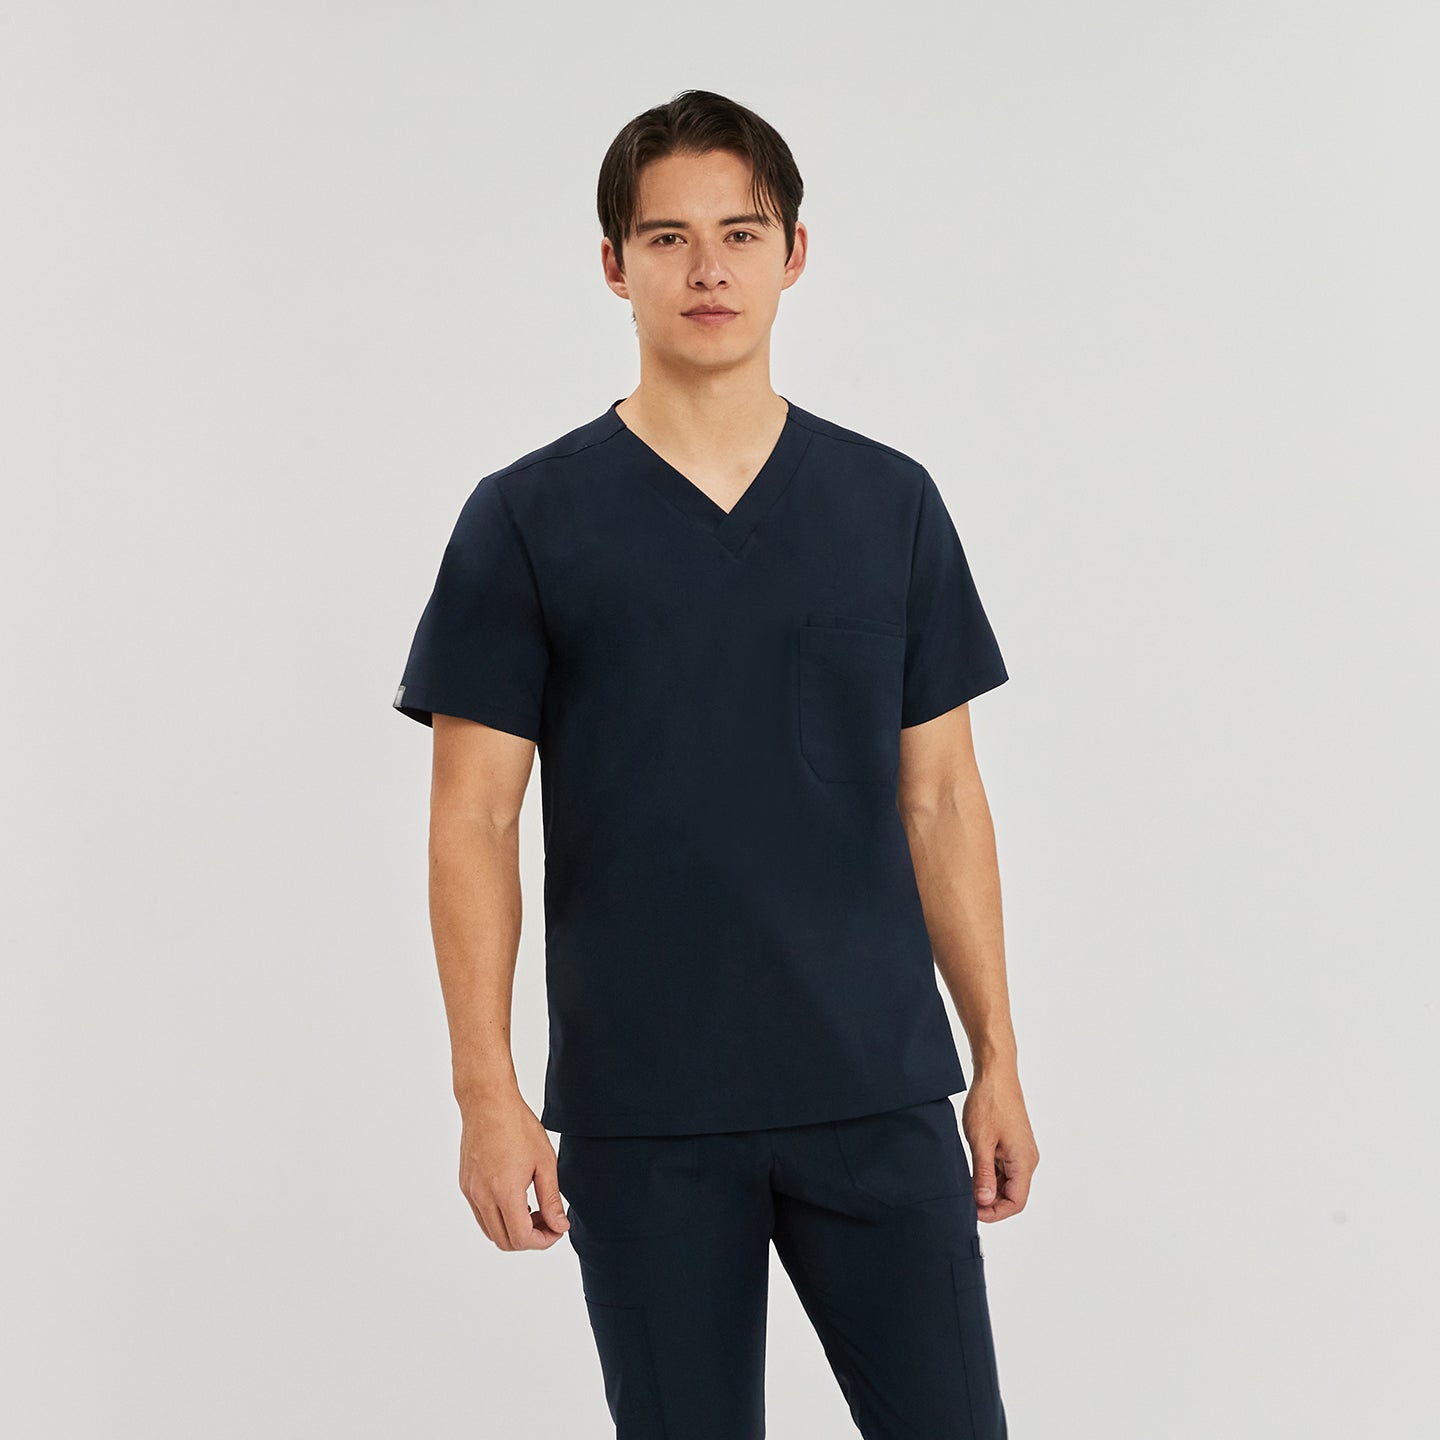 Male model wearing a navy blue scrub top with a V-neck and a single chest pocket, standing against a plain background, Navy